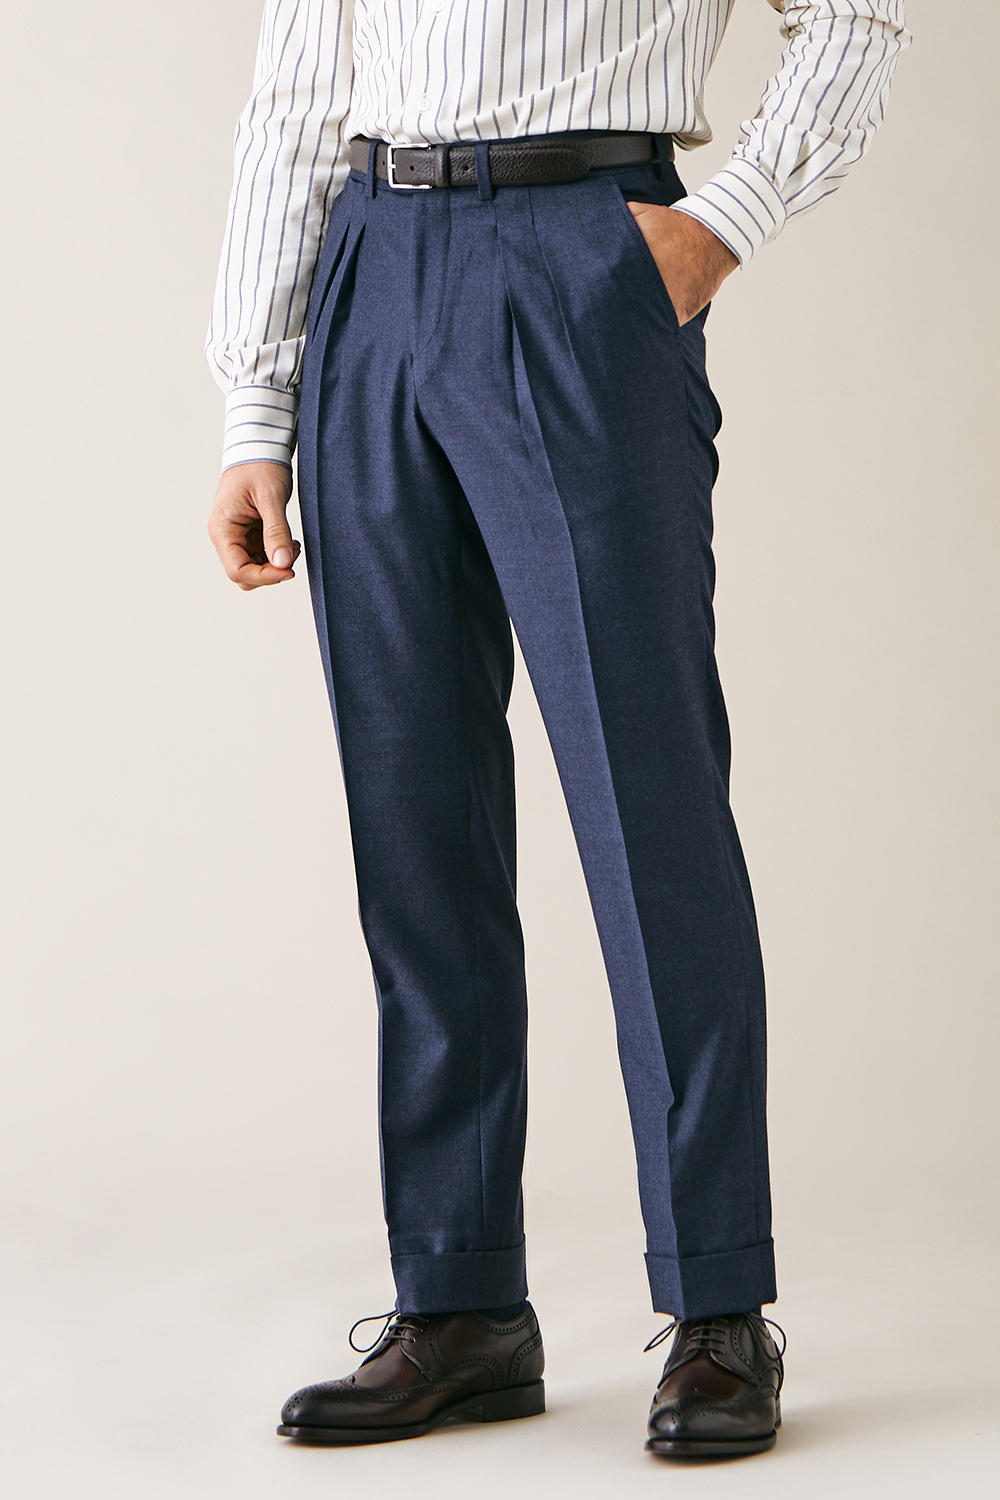 Navy Flannel Hollywood Trousers